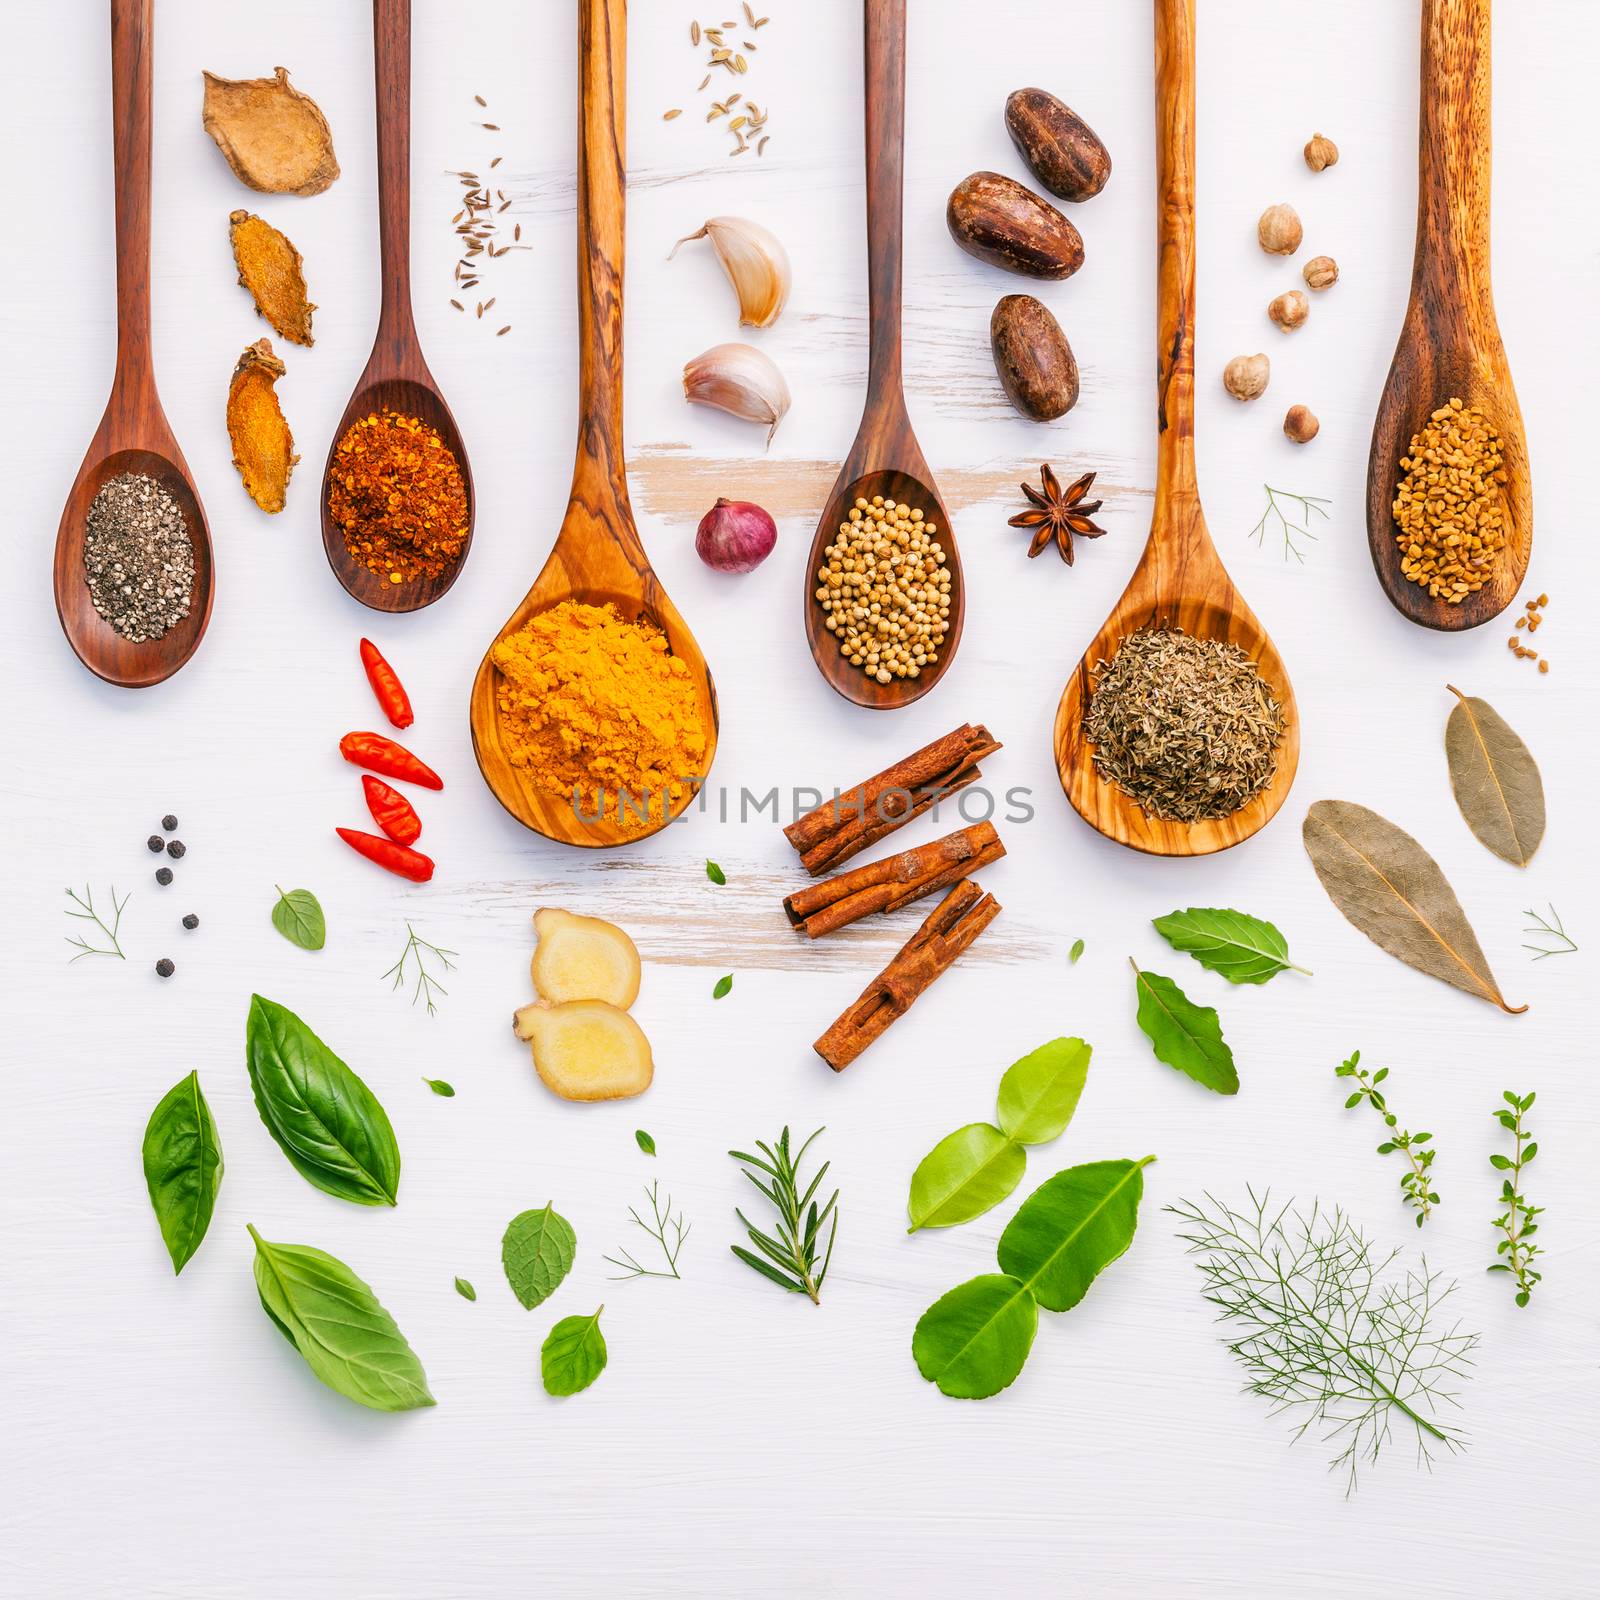 Various herbs and spices in wooden spoons. Flat lay of spices in by kerdkanno